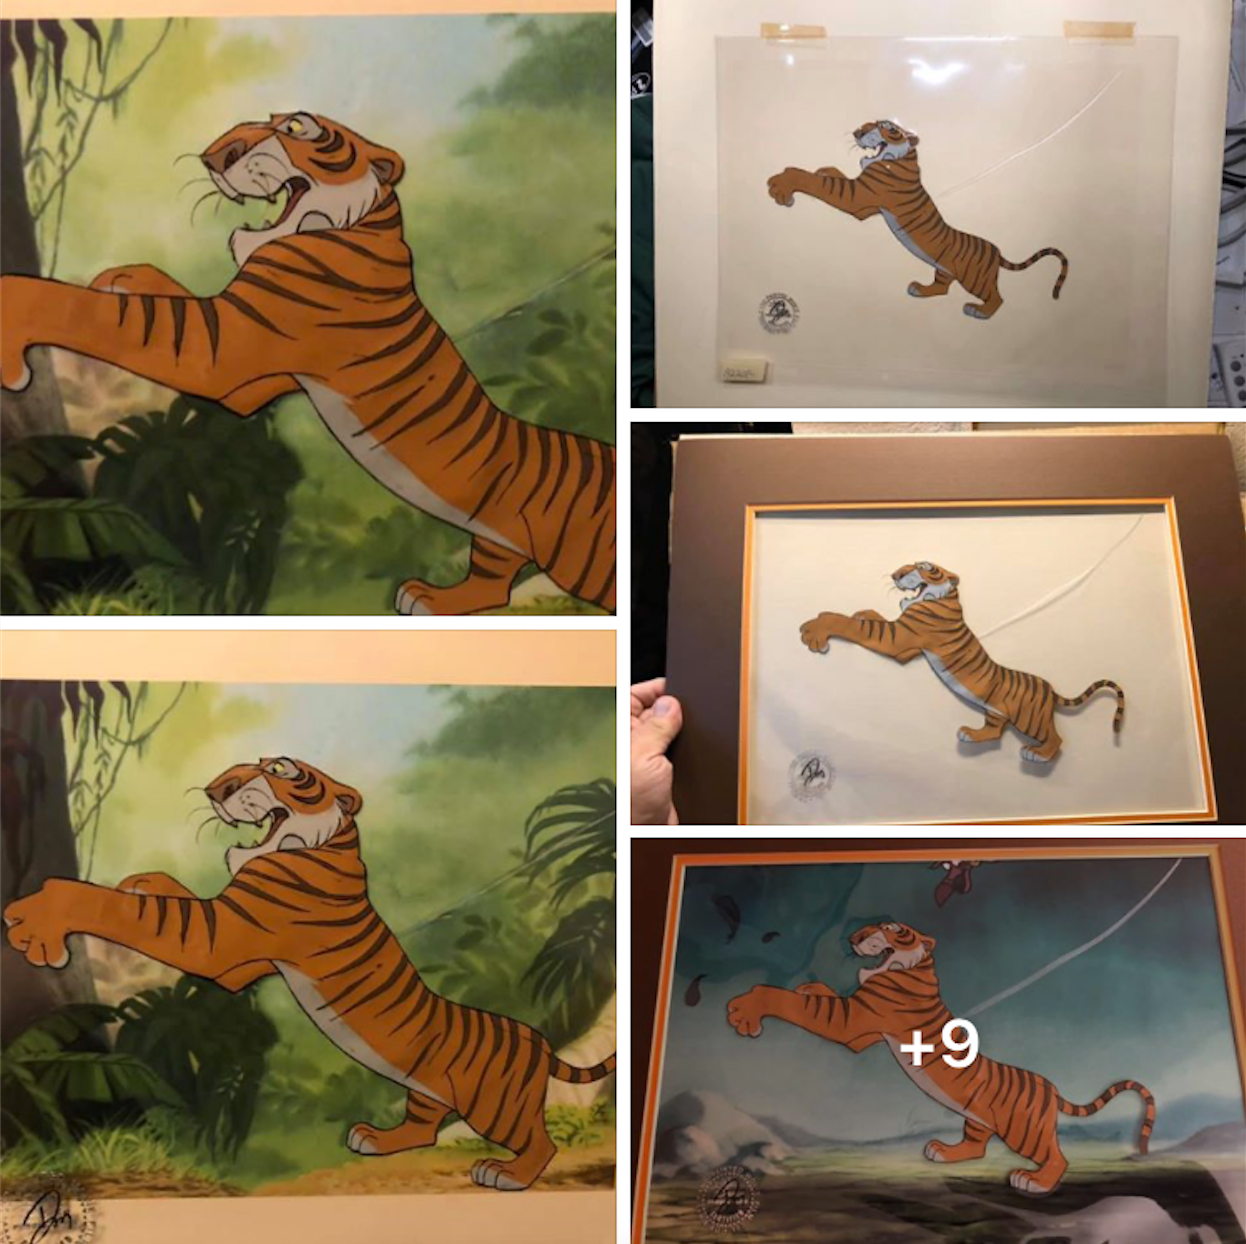 Original Walt Disney Production Cel from The Jungle Book featuring Shere Khan